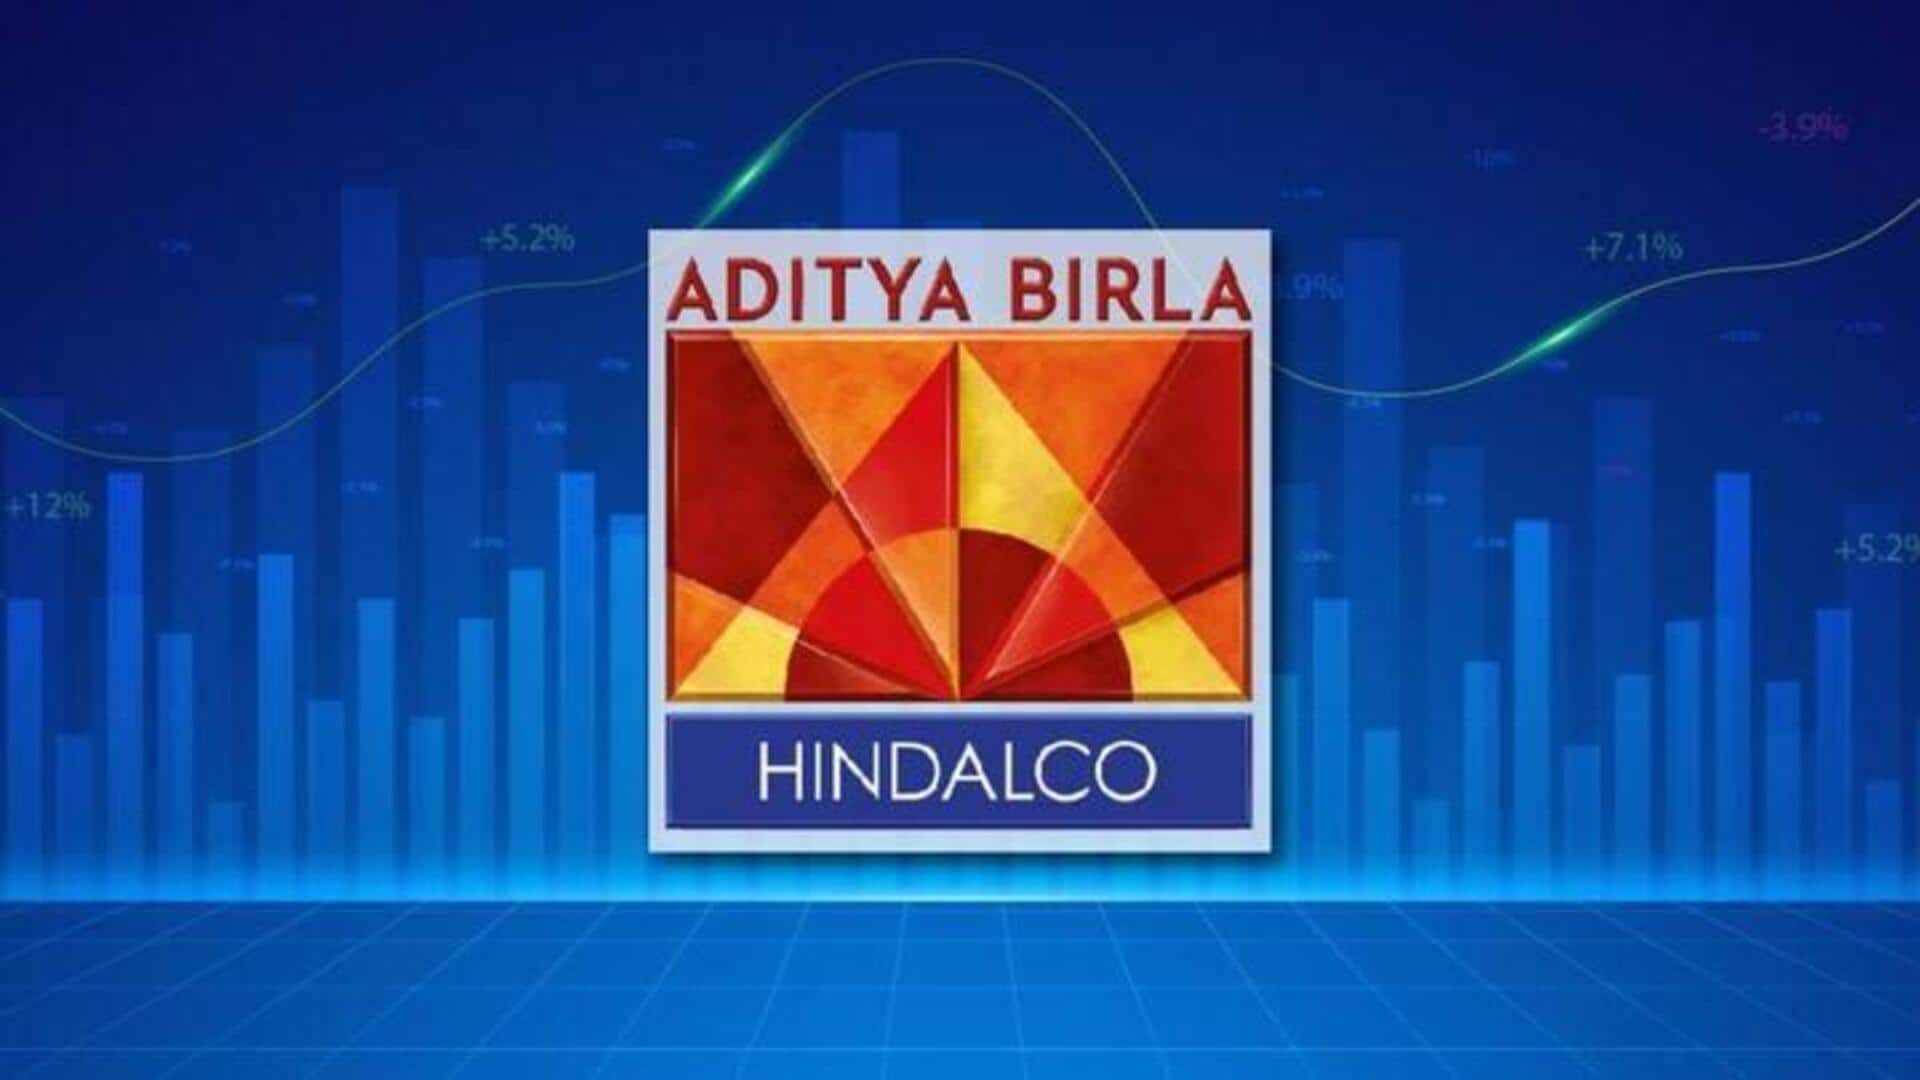 Hindalco's Q3 profit skyrockets 71% to Rs. 2,331 crore